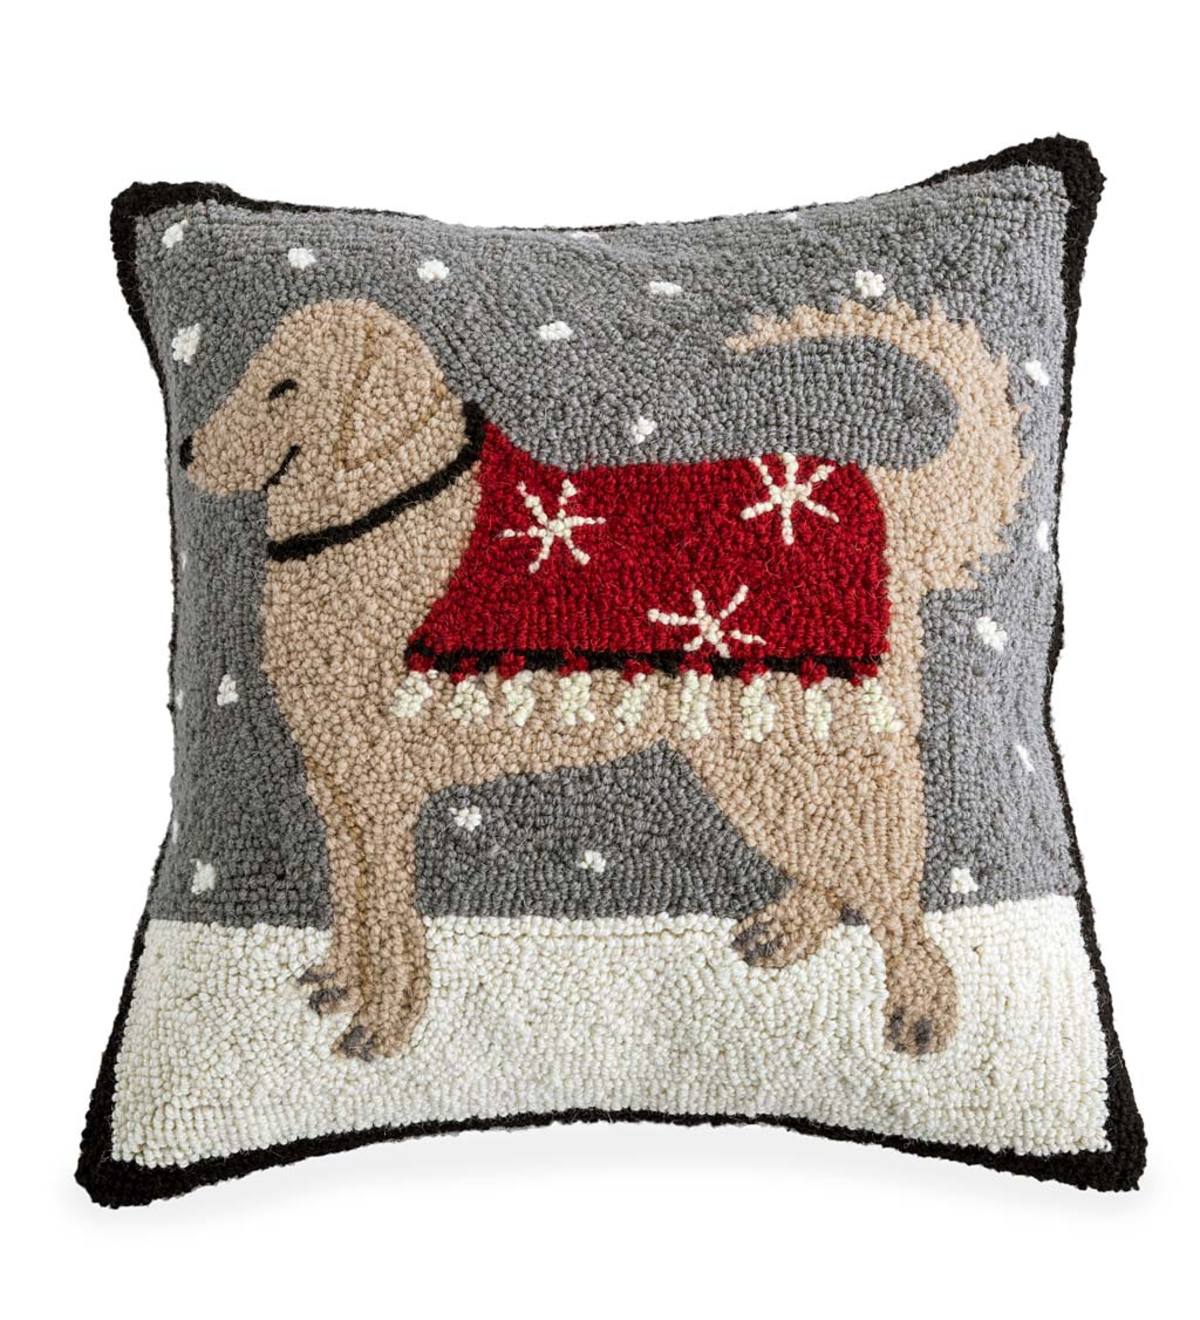 Hand-Hooked Wool Retriever Snow Day Throw Pillow